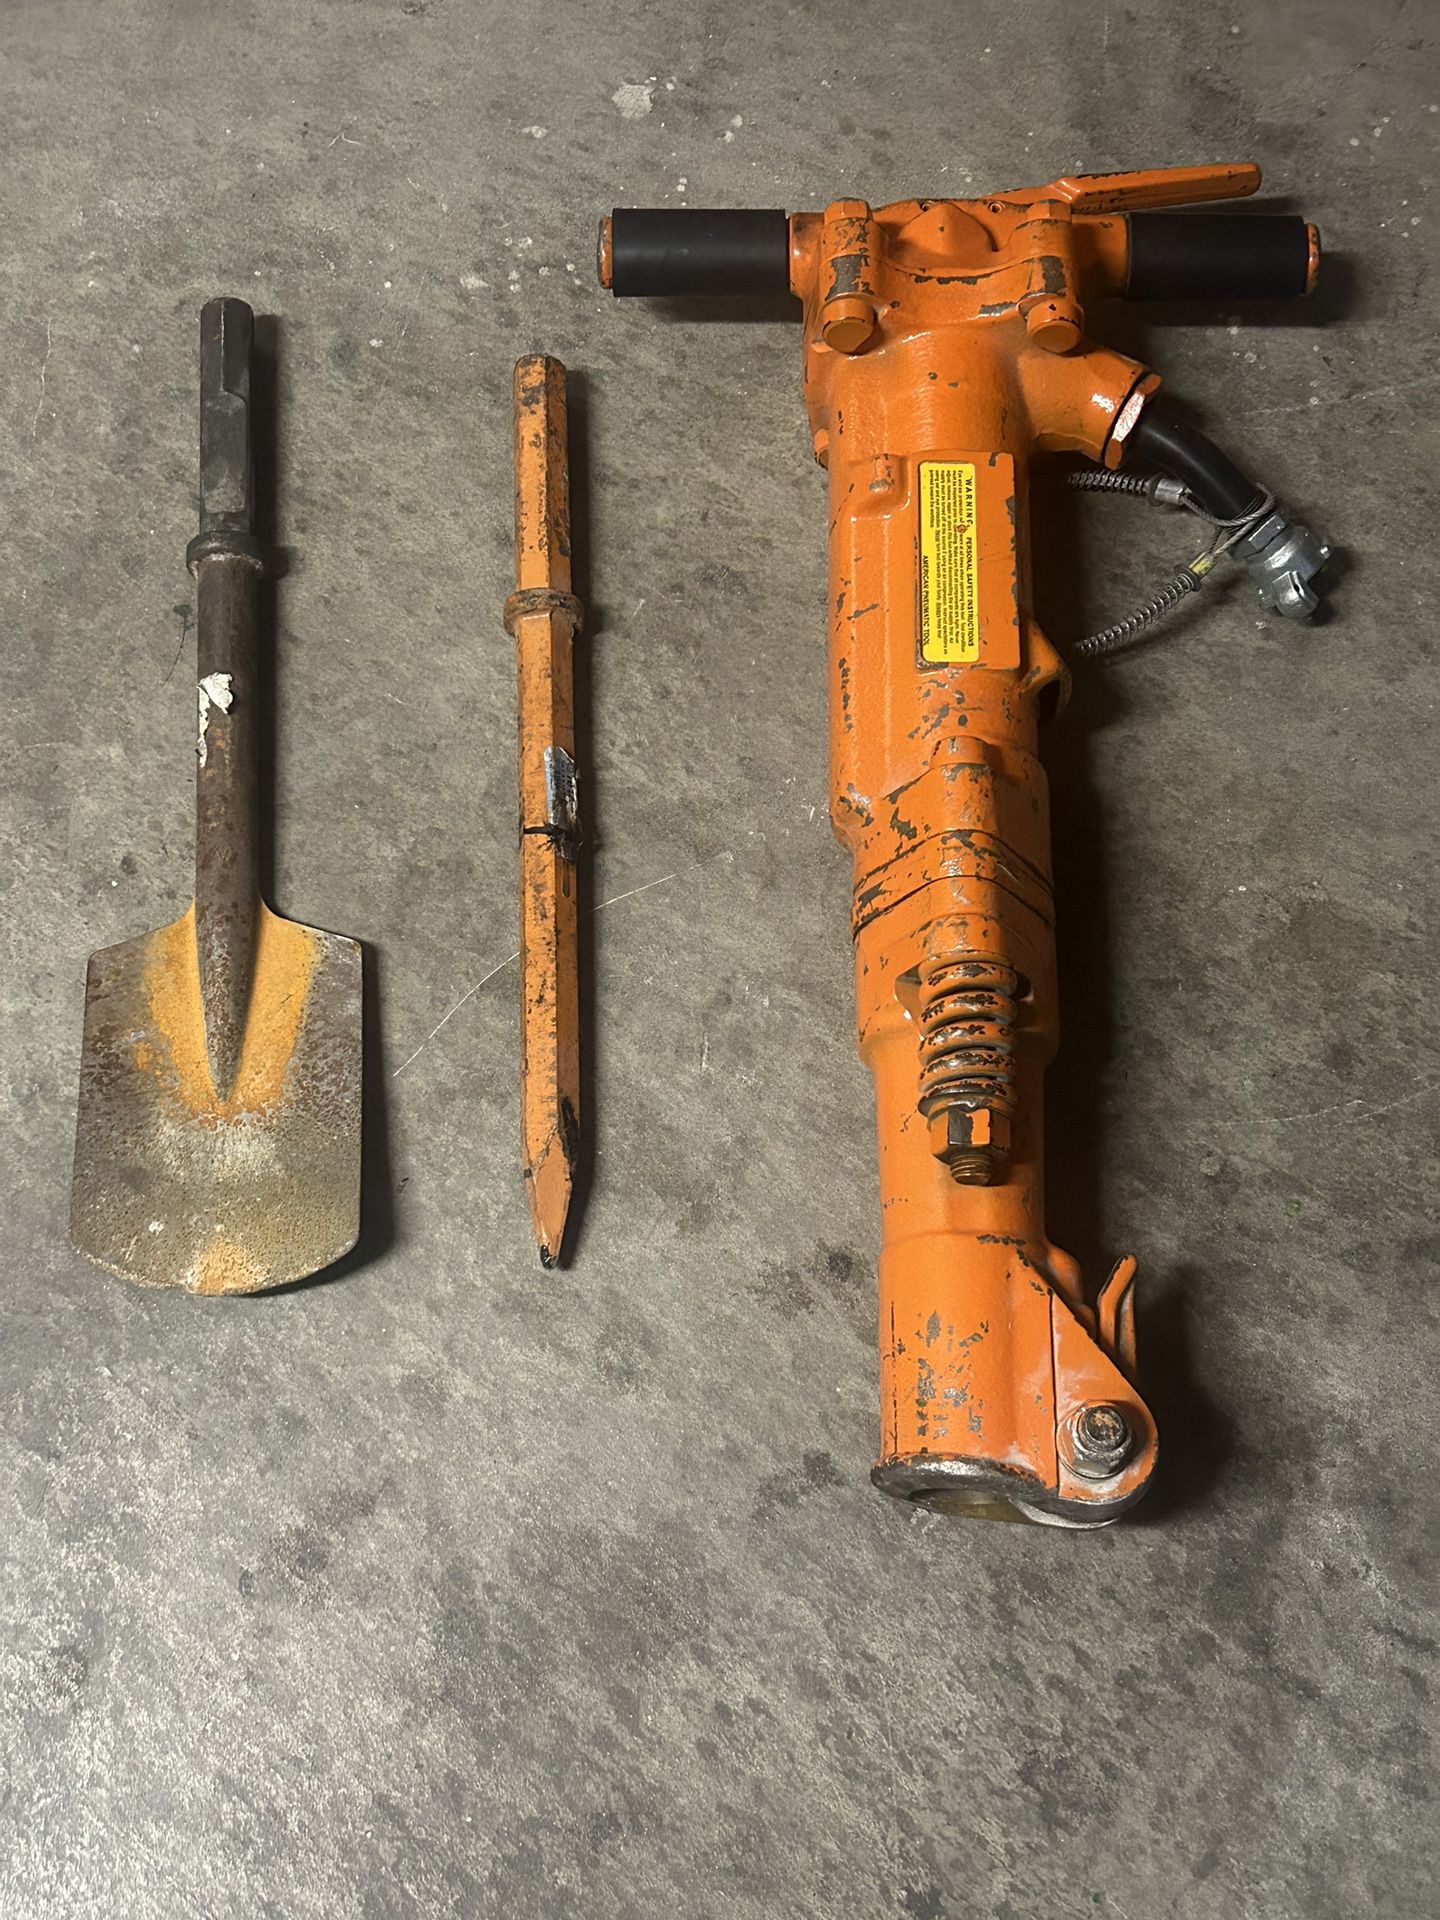 90lb A P T Jack Hammer With 2 Assortments In Excellent Condition 